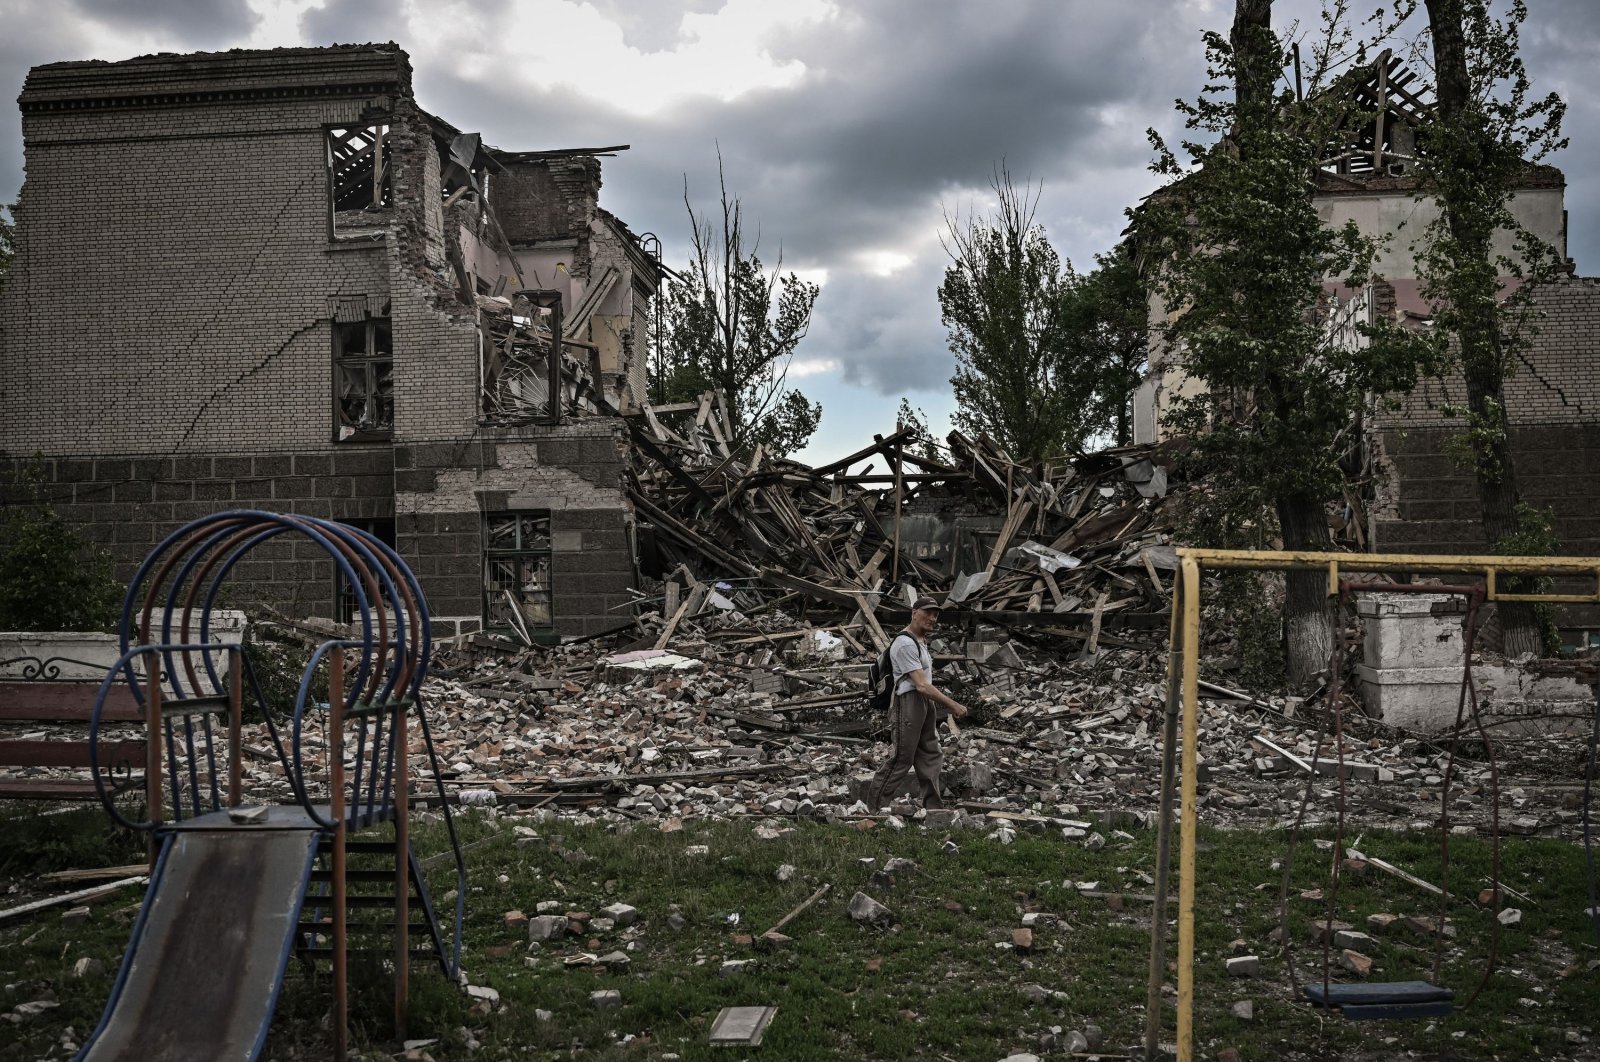 A man walks in front of a destroyed school in the city of Bakhmut amid the Russian invasion of Ukraine, Donbass region, eastern Ukraine, May 28, 2022. (AFP Photo)